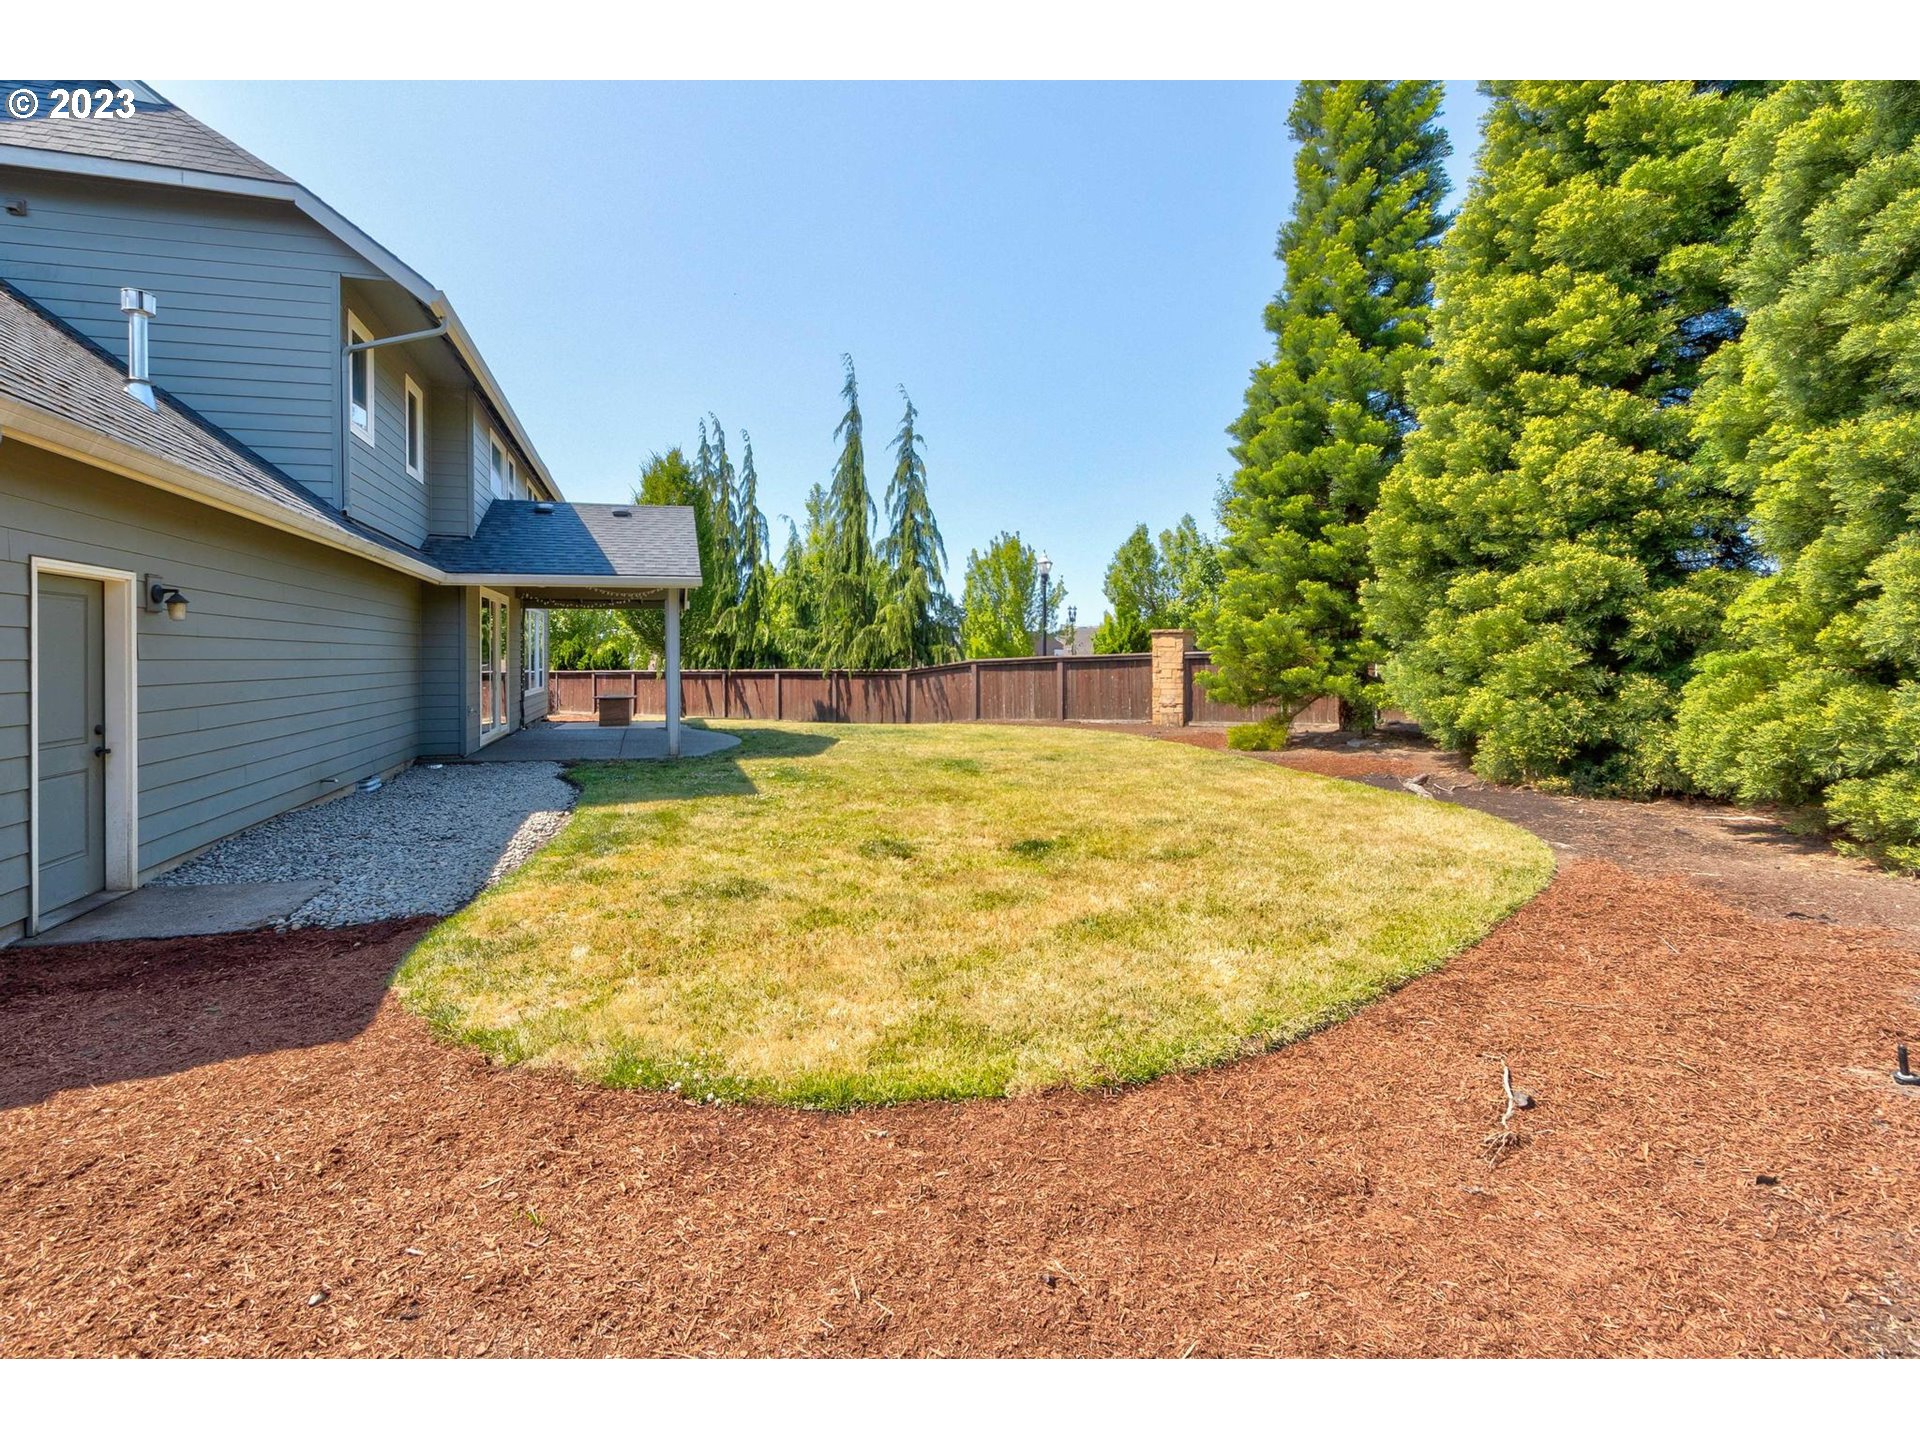 3104 NW 105th St, Vancouver, WA 98685